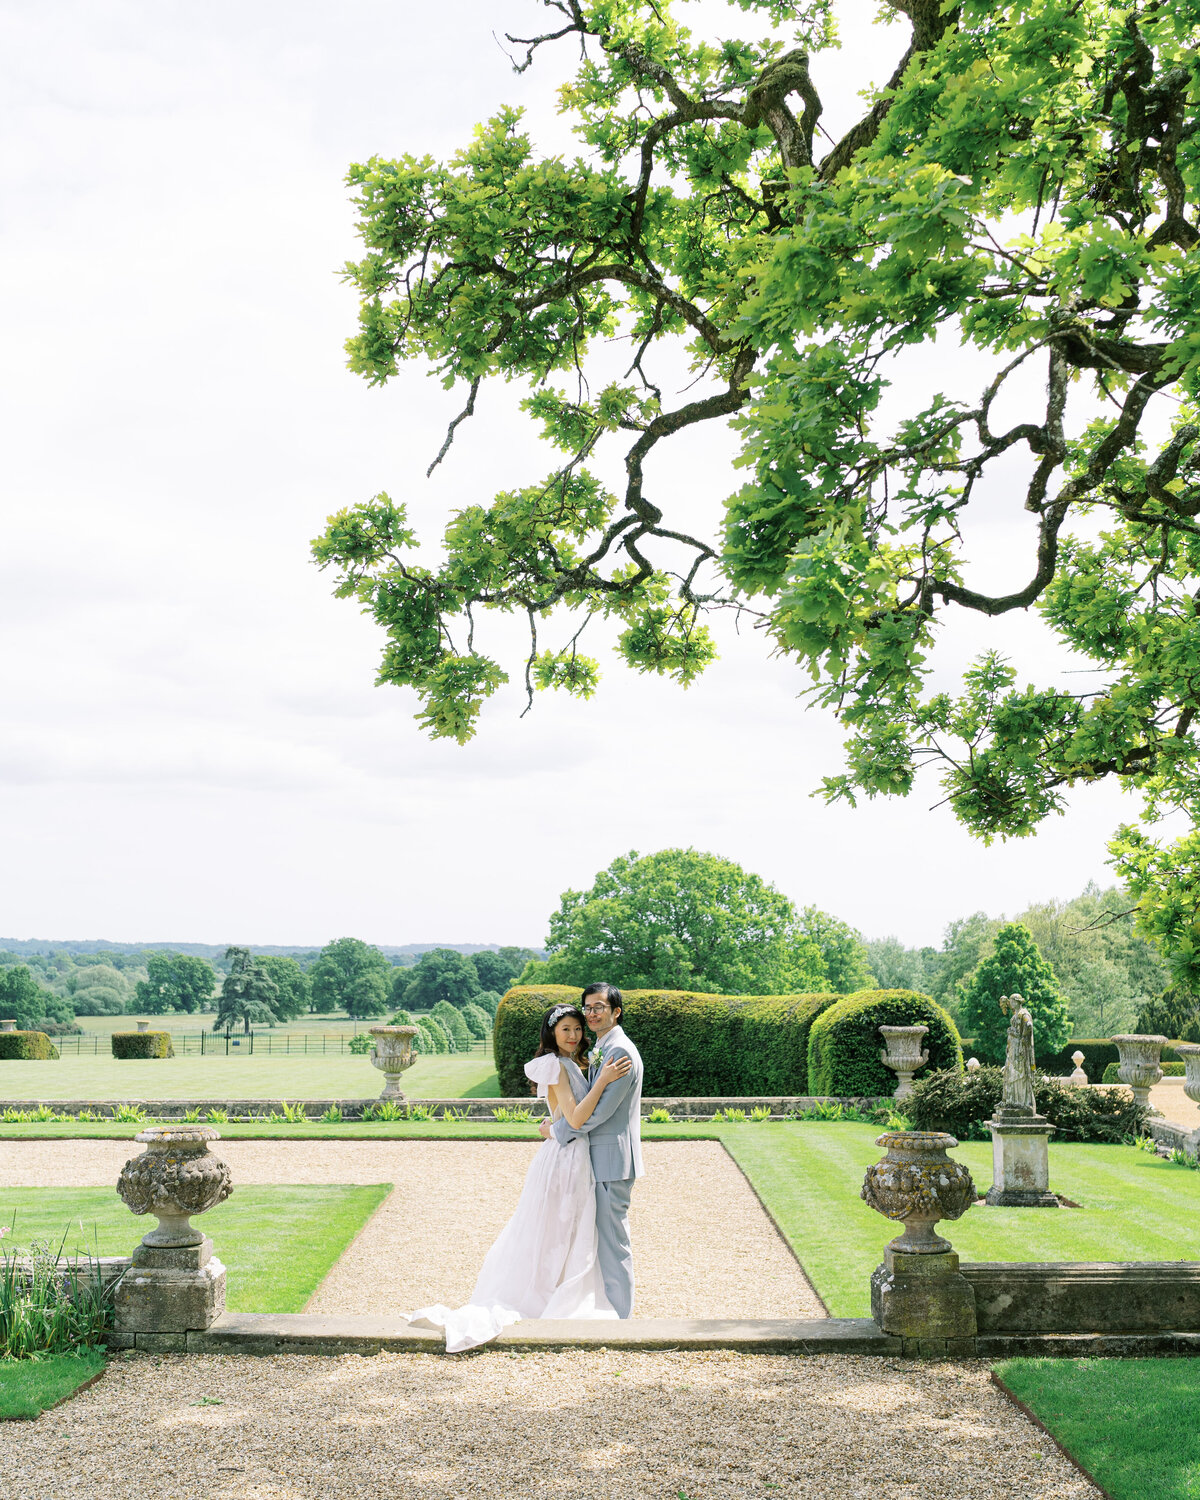 Couples portrait at Somerley House wedding venue in Hampshire